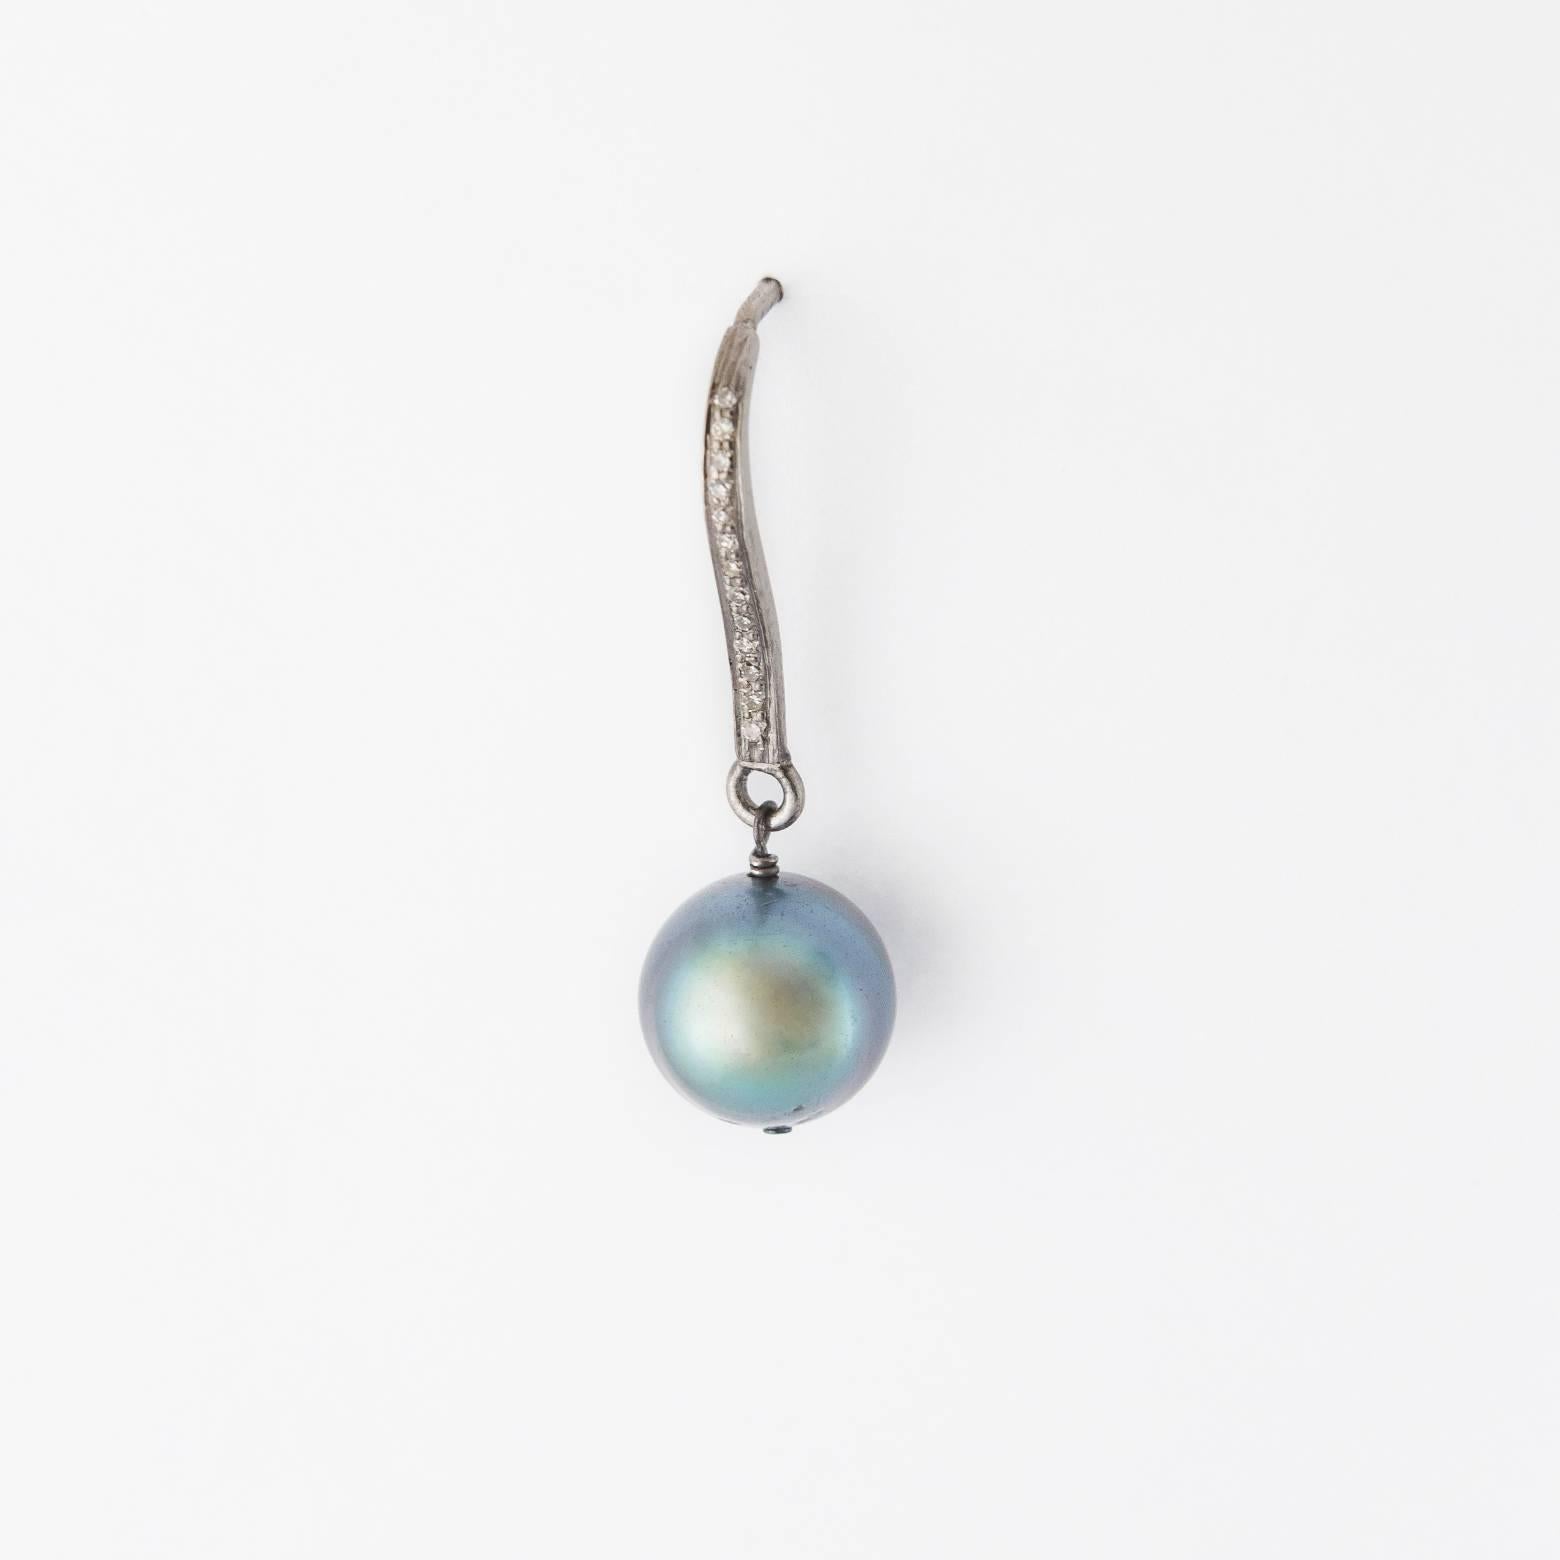 Diamond and Black Pearls from the Cook Islands set in Sterling Silver. Elegant and versatile enough to be worn everyday. The pearls absorb and reflect the colors around it in such a subtle way that they look great with everything. Pearls are 8mm.